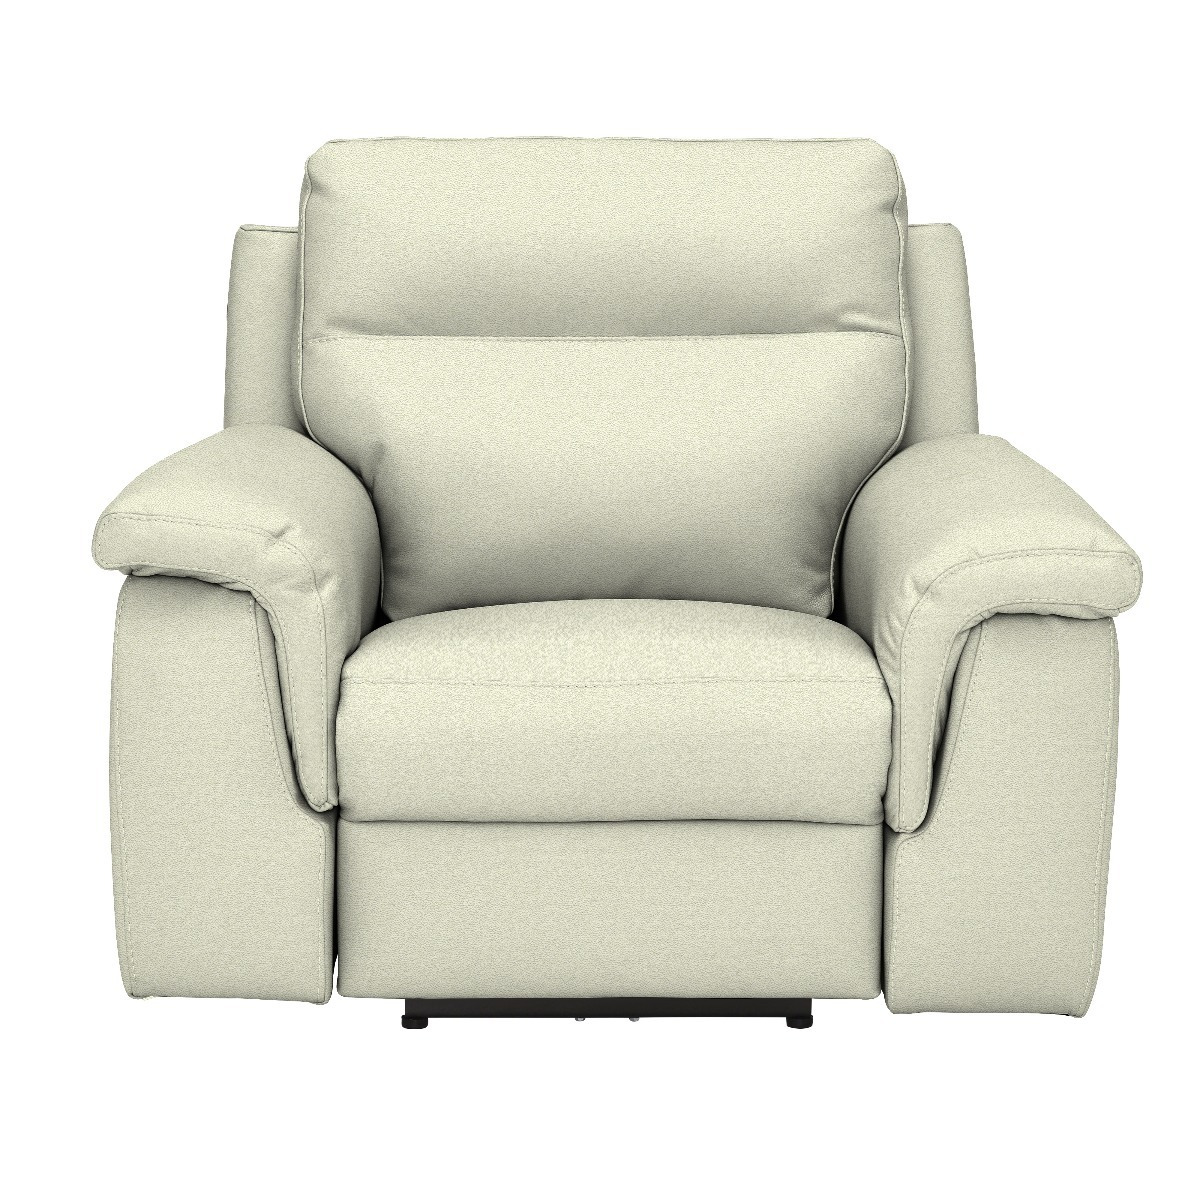 Fulton Recliner Chair With Electric Recliner, White Leather - Barker & Stonehouse - image 1